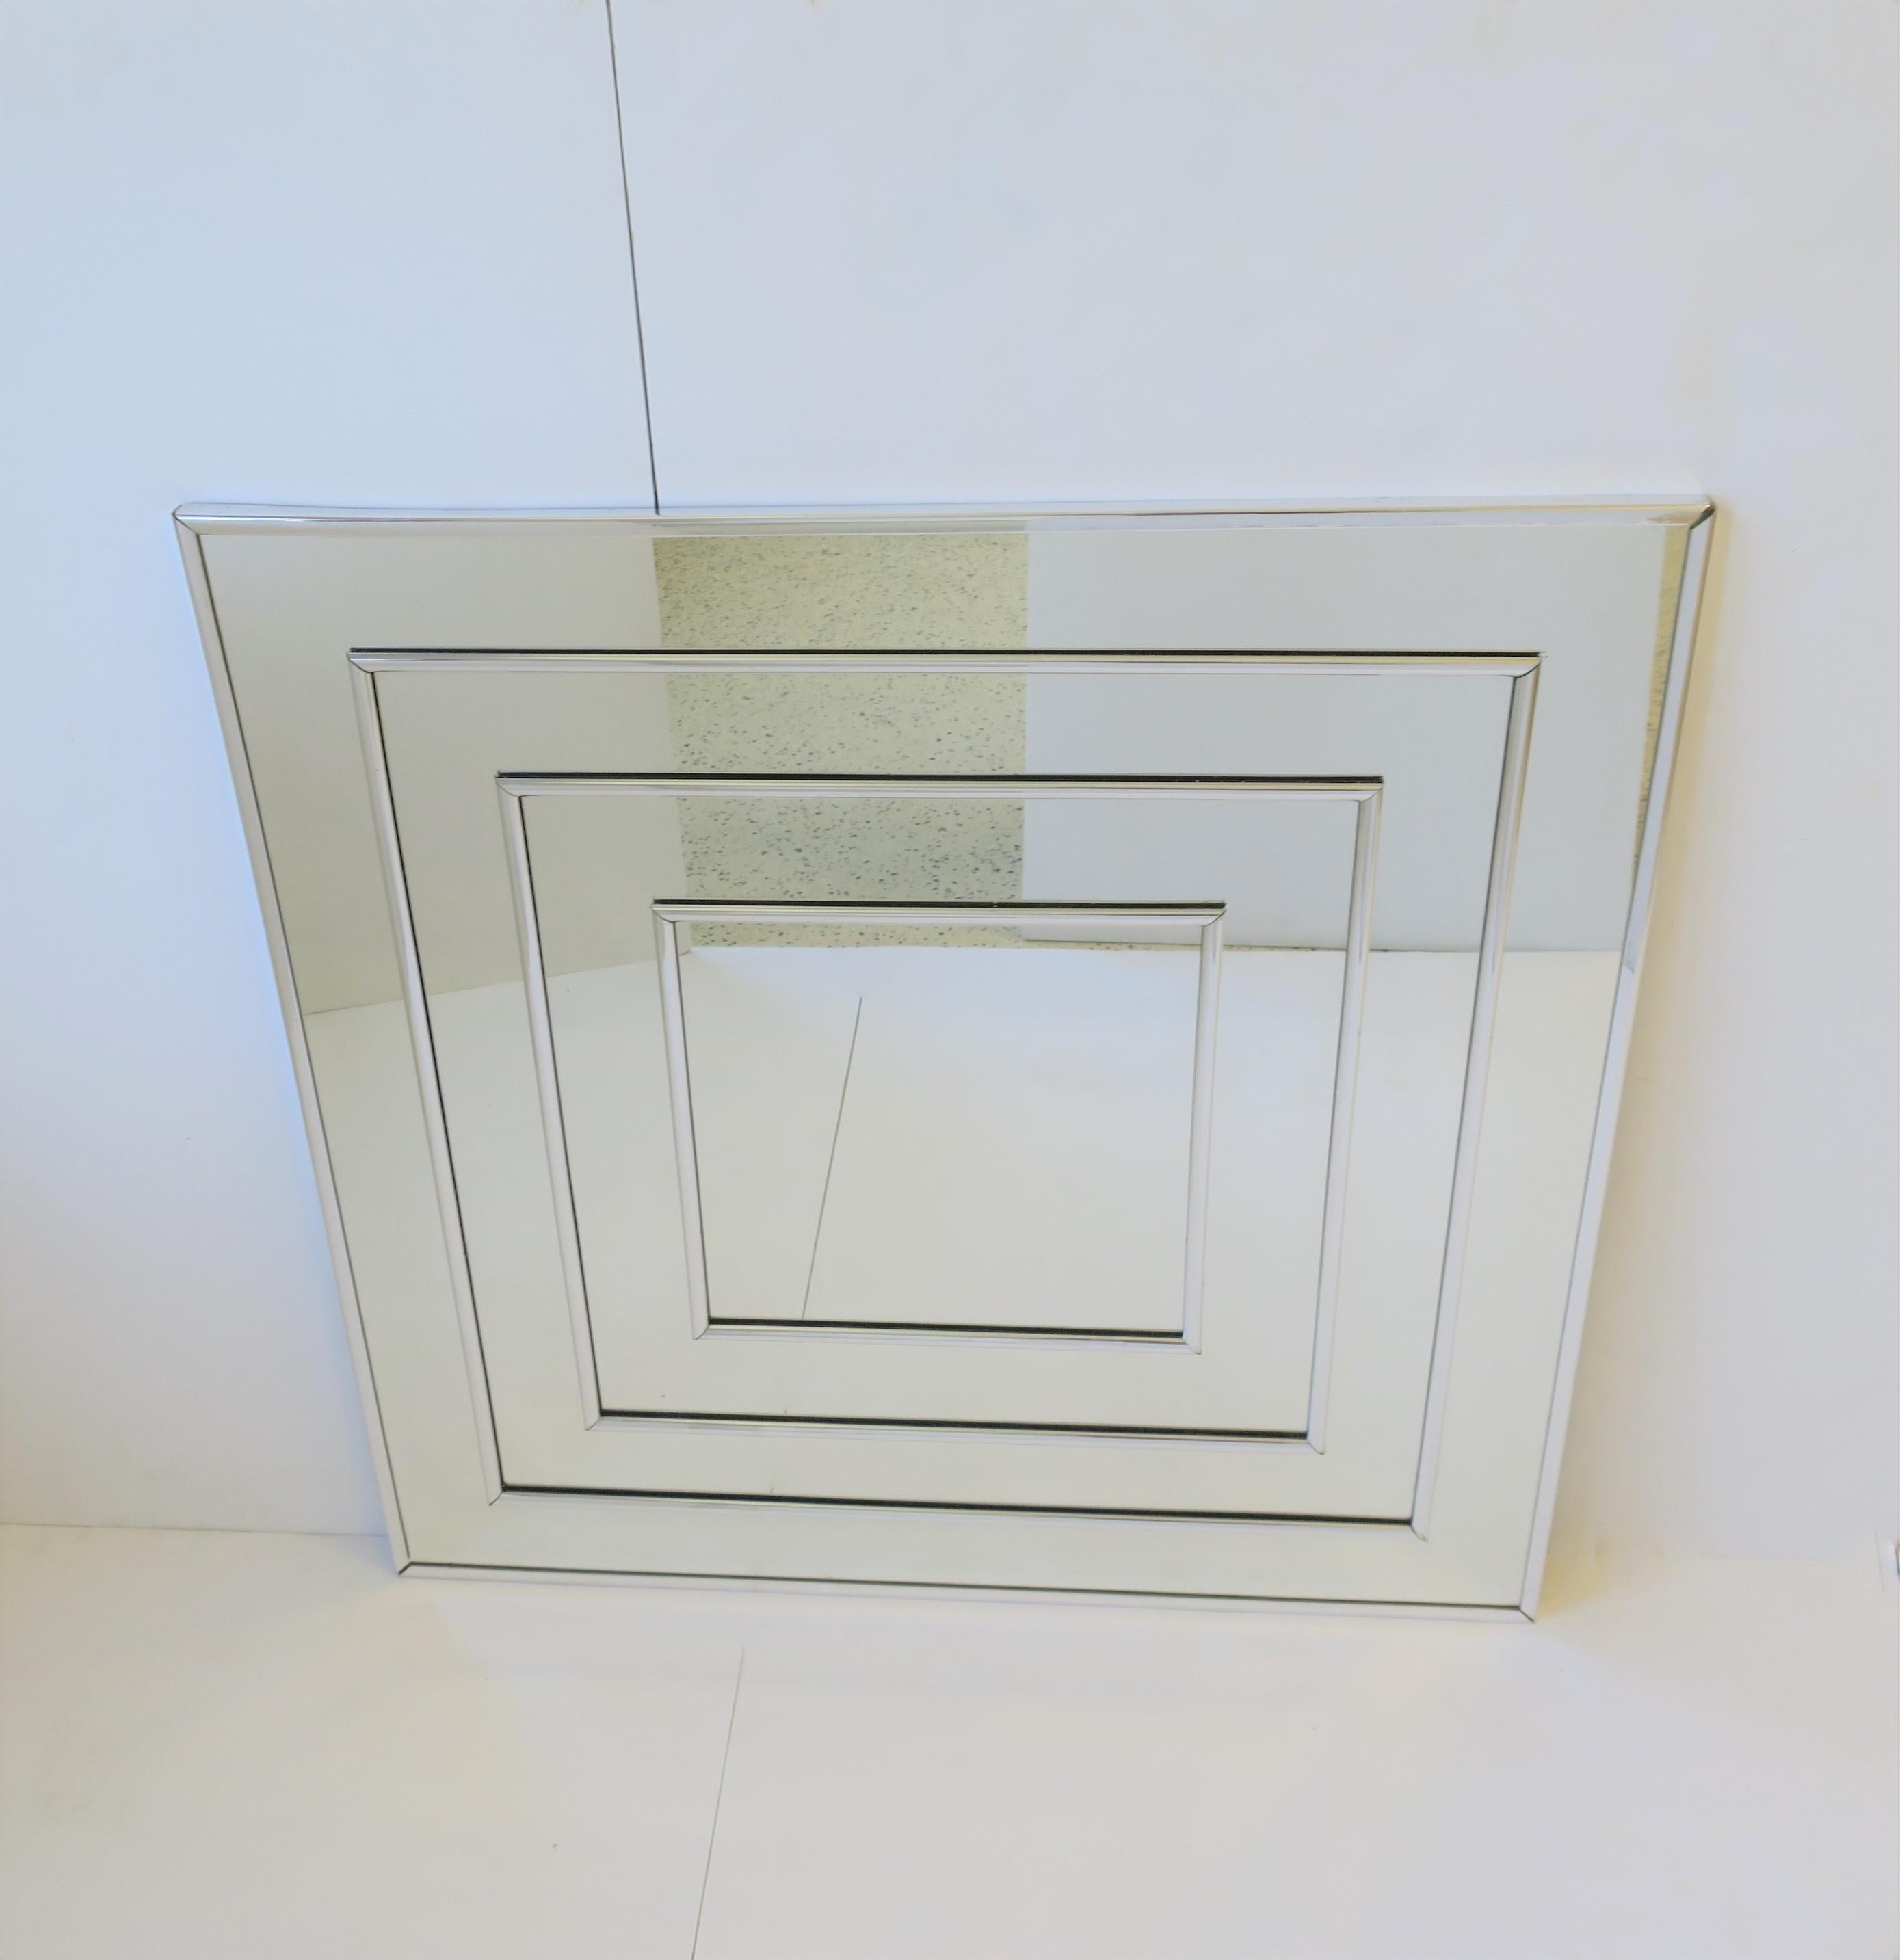 A vintage '70s modern mirror with chrome detail and frame, circa 1970s, USA. Mirror is prepared to hang across (square) or at its corner (diamond shape) as show in image #7 and 8. Mirror measures: 30